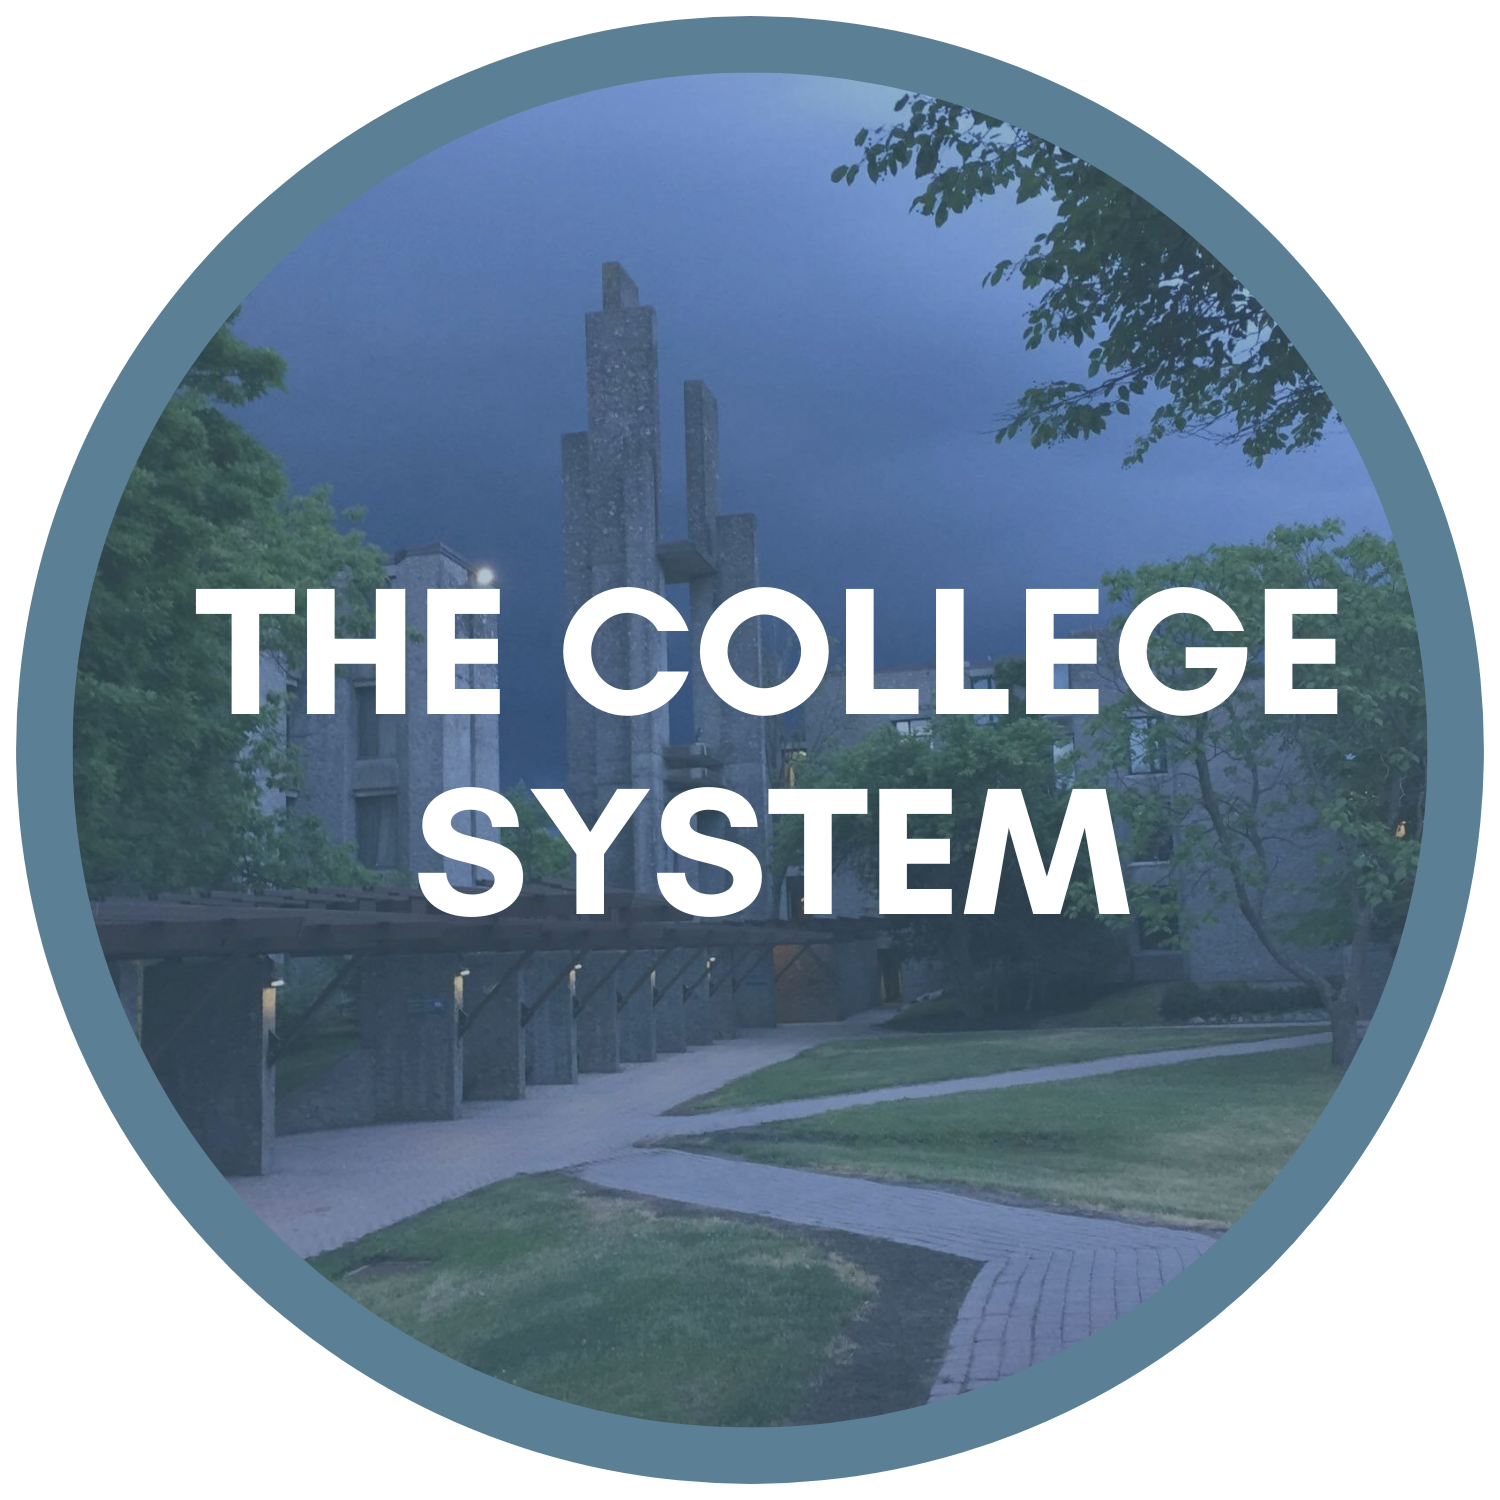 The college system